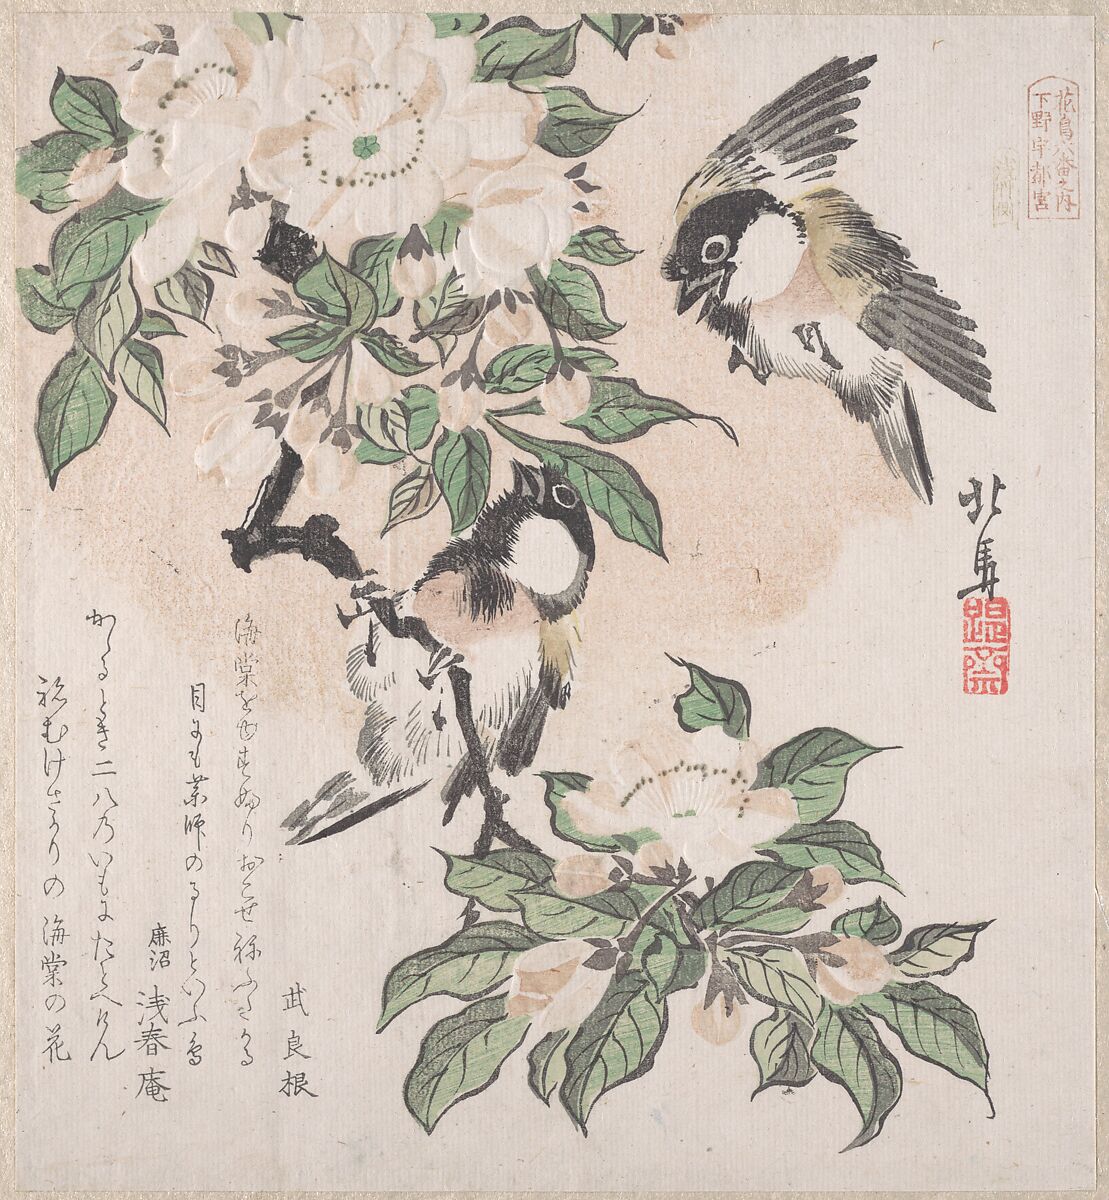 Spring Rain Collection (Harusame shū), vol. 3: Marsh-tits and Crab Apple Flowers, Teisai Hokuba (Japanese, 1771–1844), Privately published woodblock prints (surimono) mounted in an album; ink and color on paper, Japan 